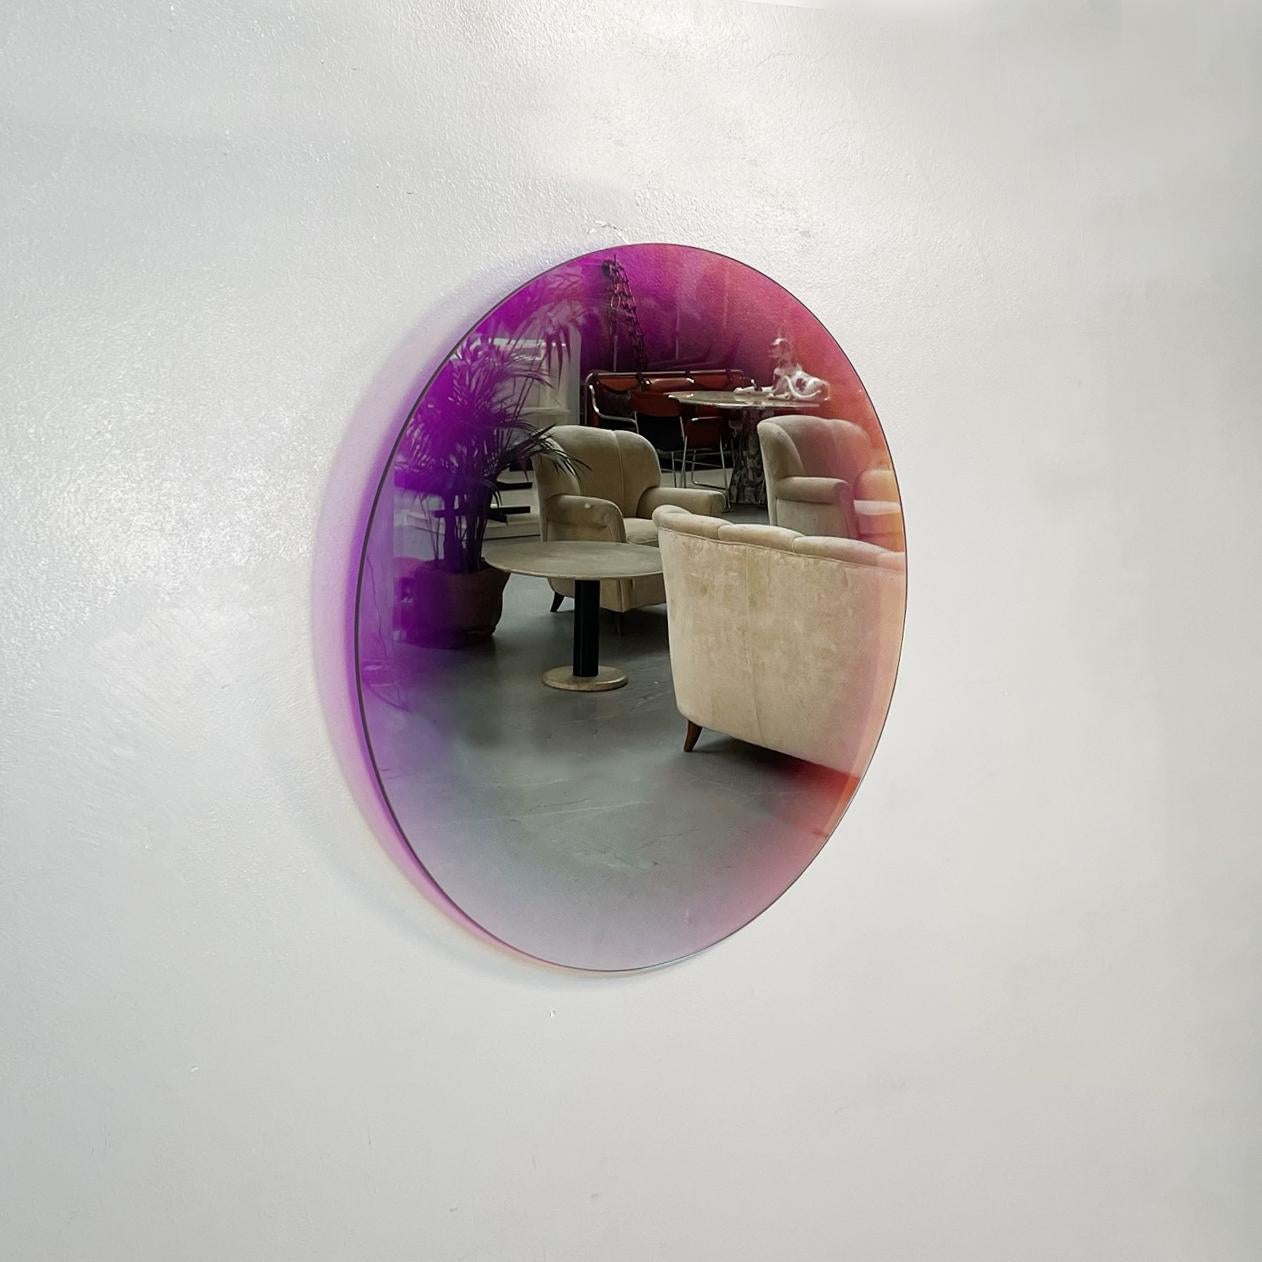 Italian Round holo wall mirror Shimmer by Patricia Urquiola for Glas Italia, 2015
Round wall mirror with double mirror with holographic purple profile. The iridescent surface has a fine dots.

Produced by Glas Italia in 2015 and designed by